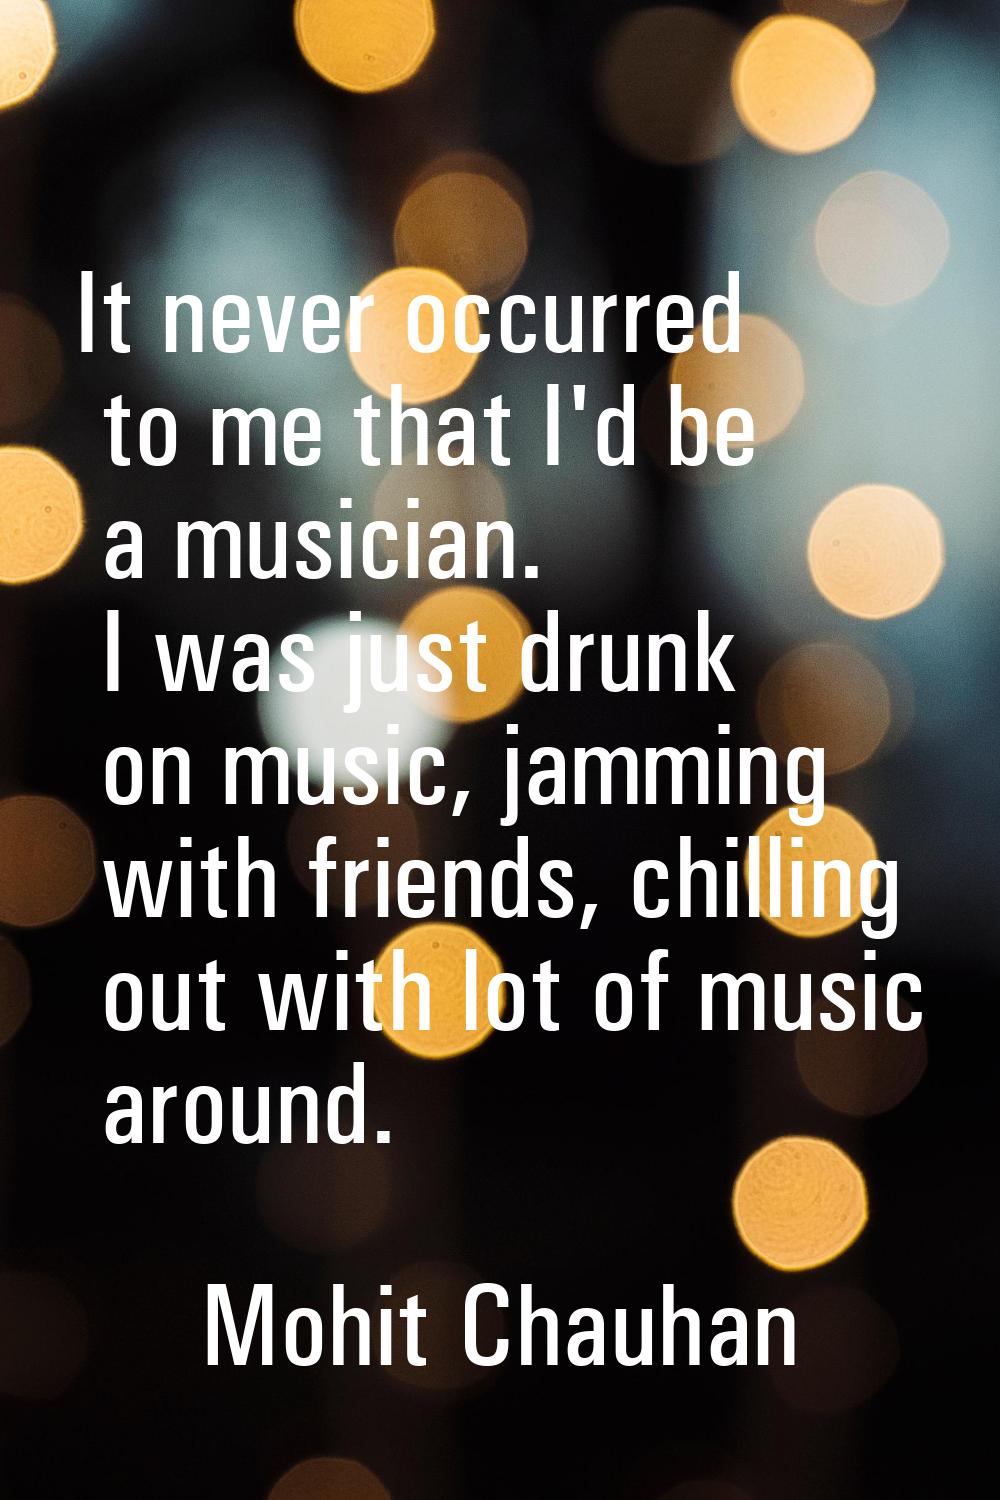 It never occurred to me that I'd be a musician. I was just drunk on music, jamming with friends, ch